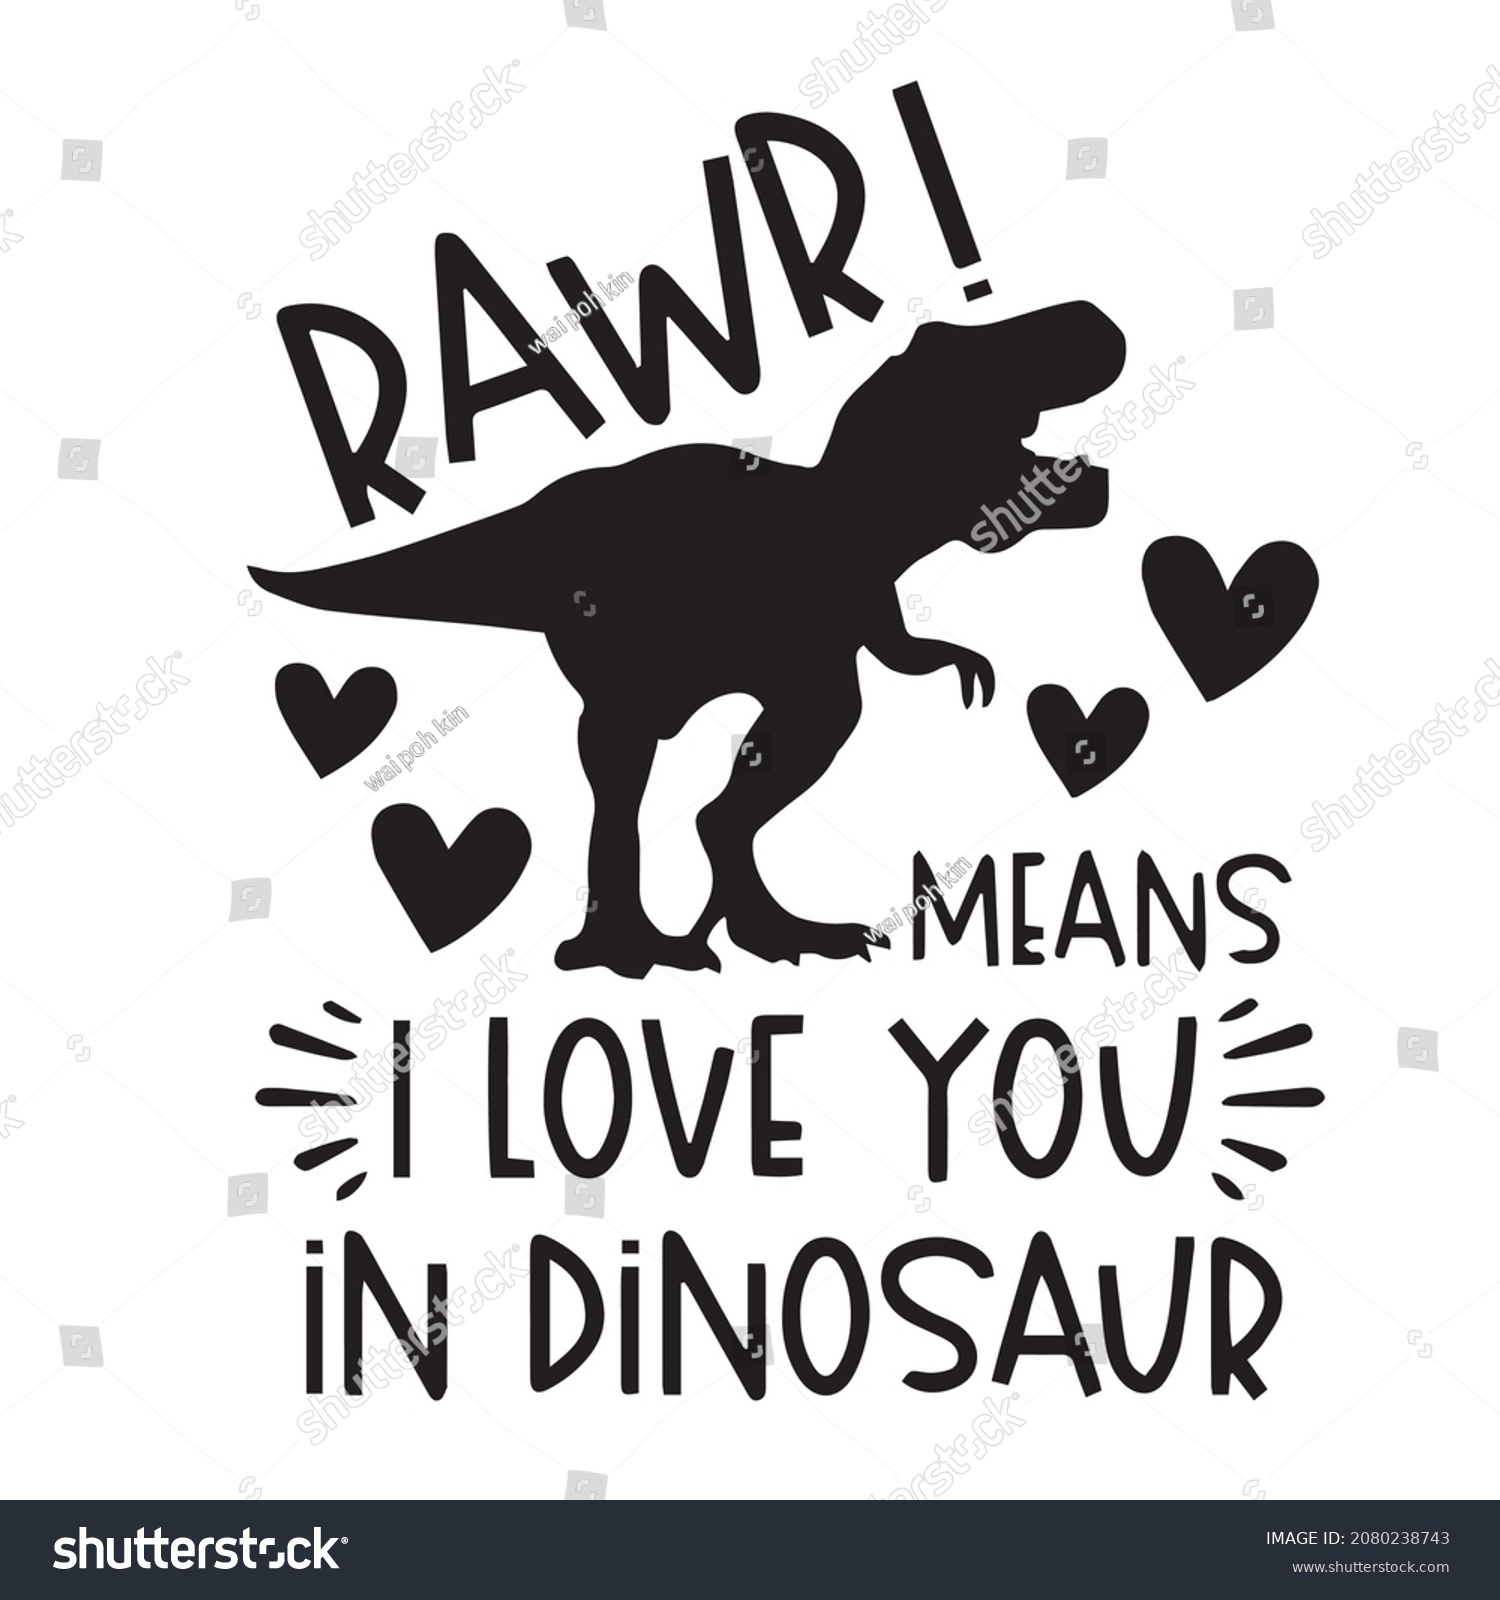 SVG of rawr means i love you in dinosaur logo inspirational quotes typography lettering design svg